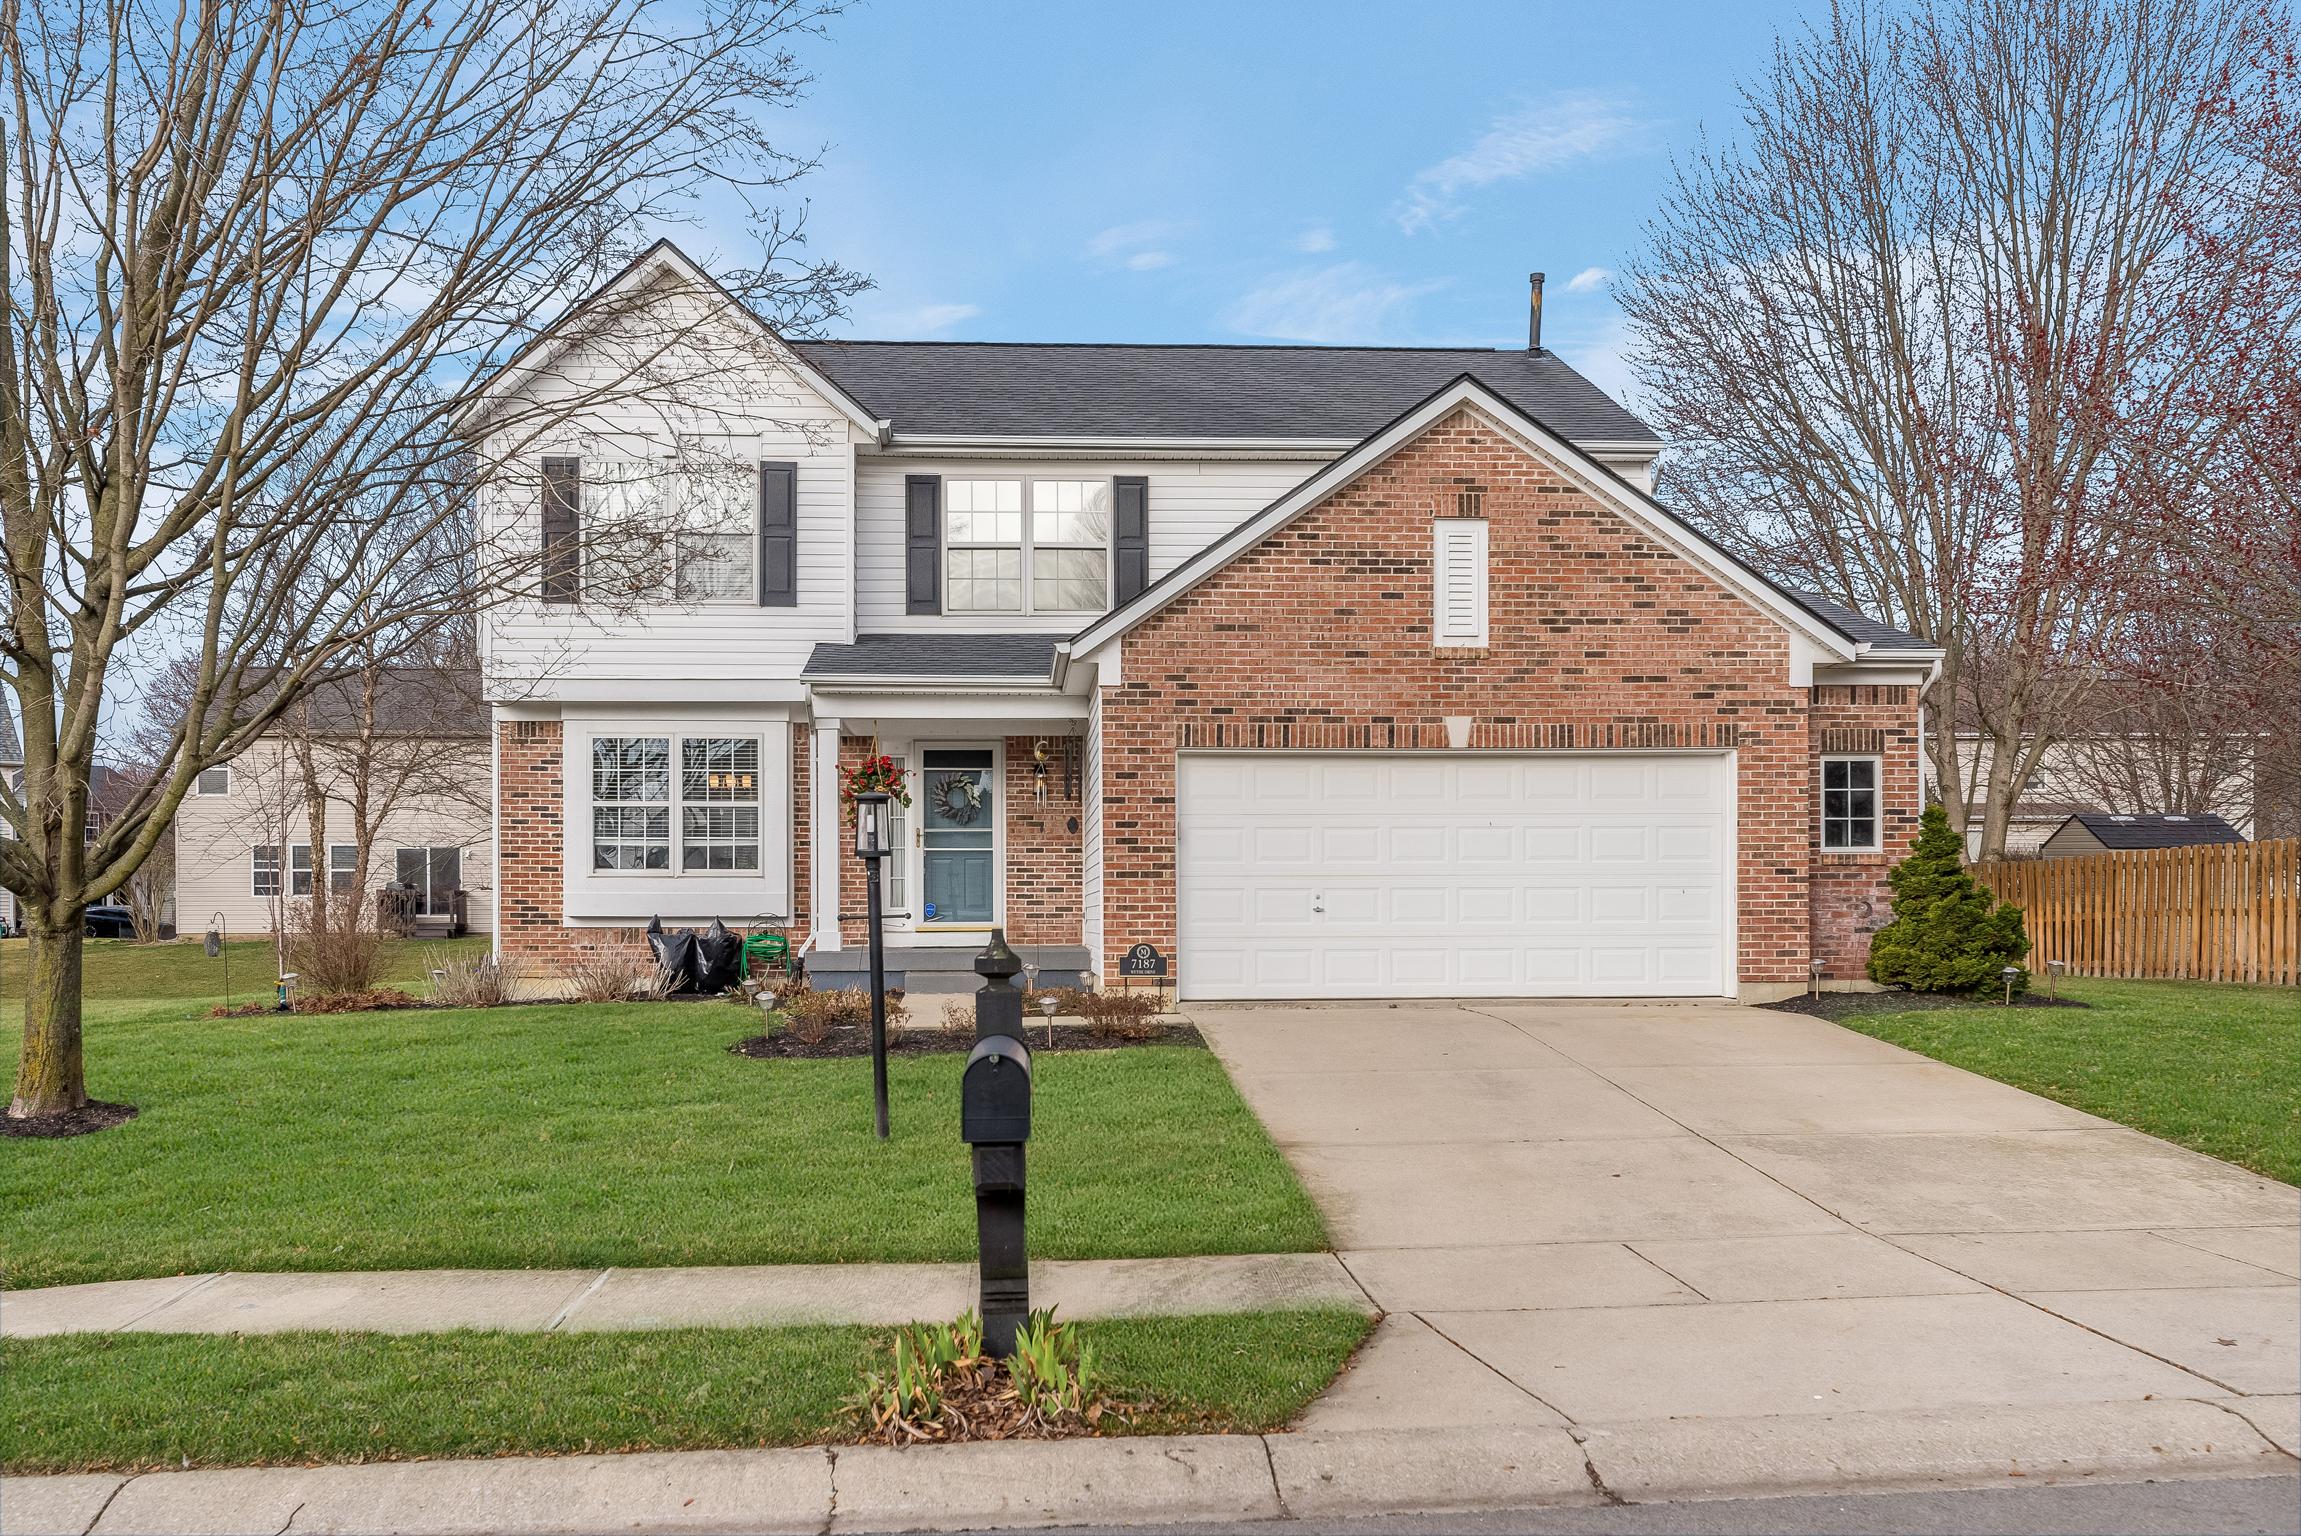 Photo one of 7187 Wythe Dr Noblesville IN 46062 | MLS 21967431